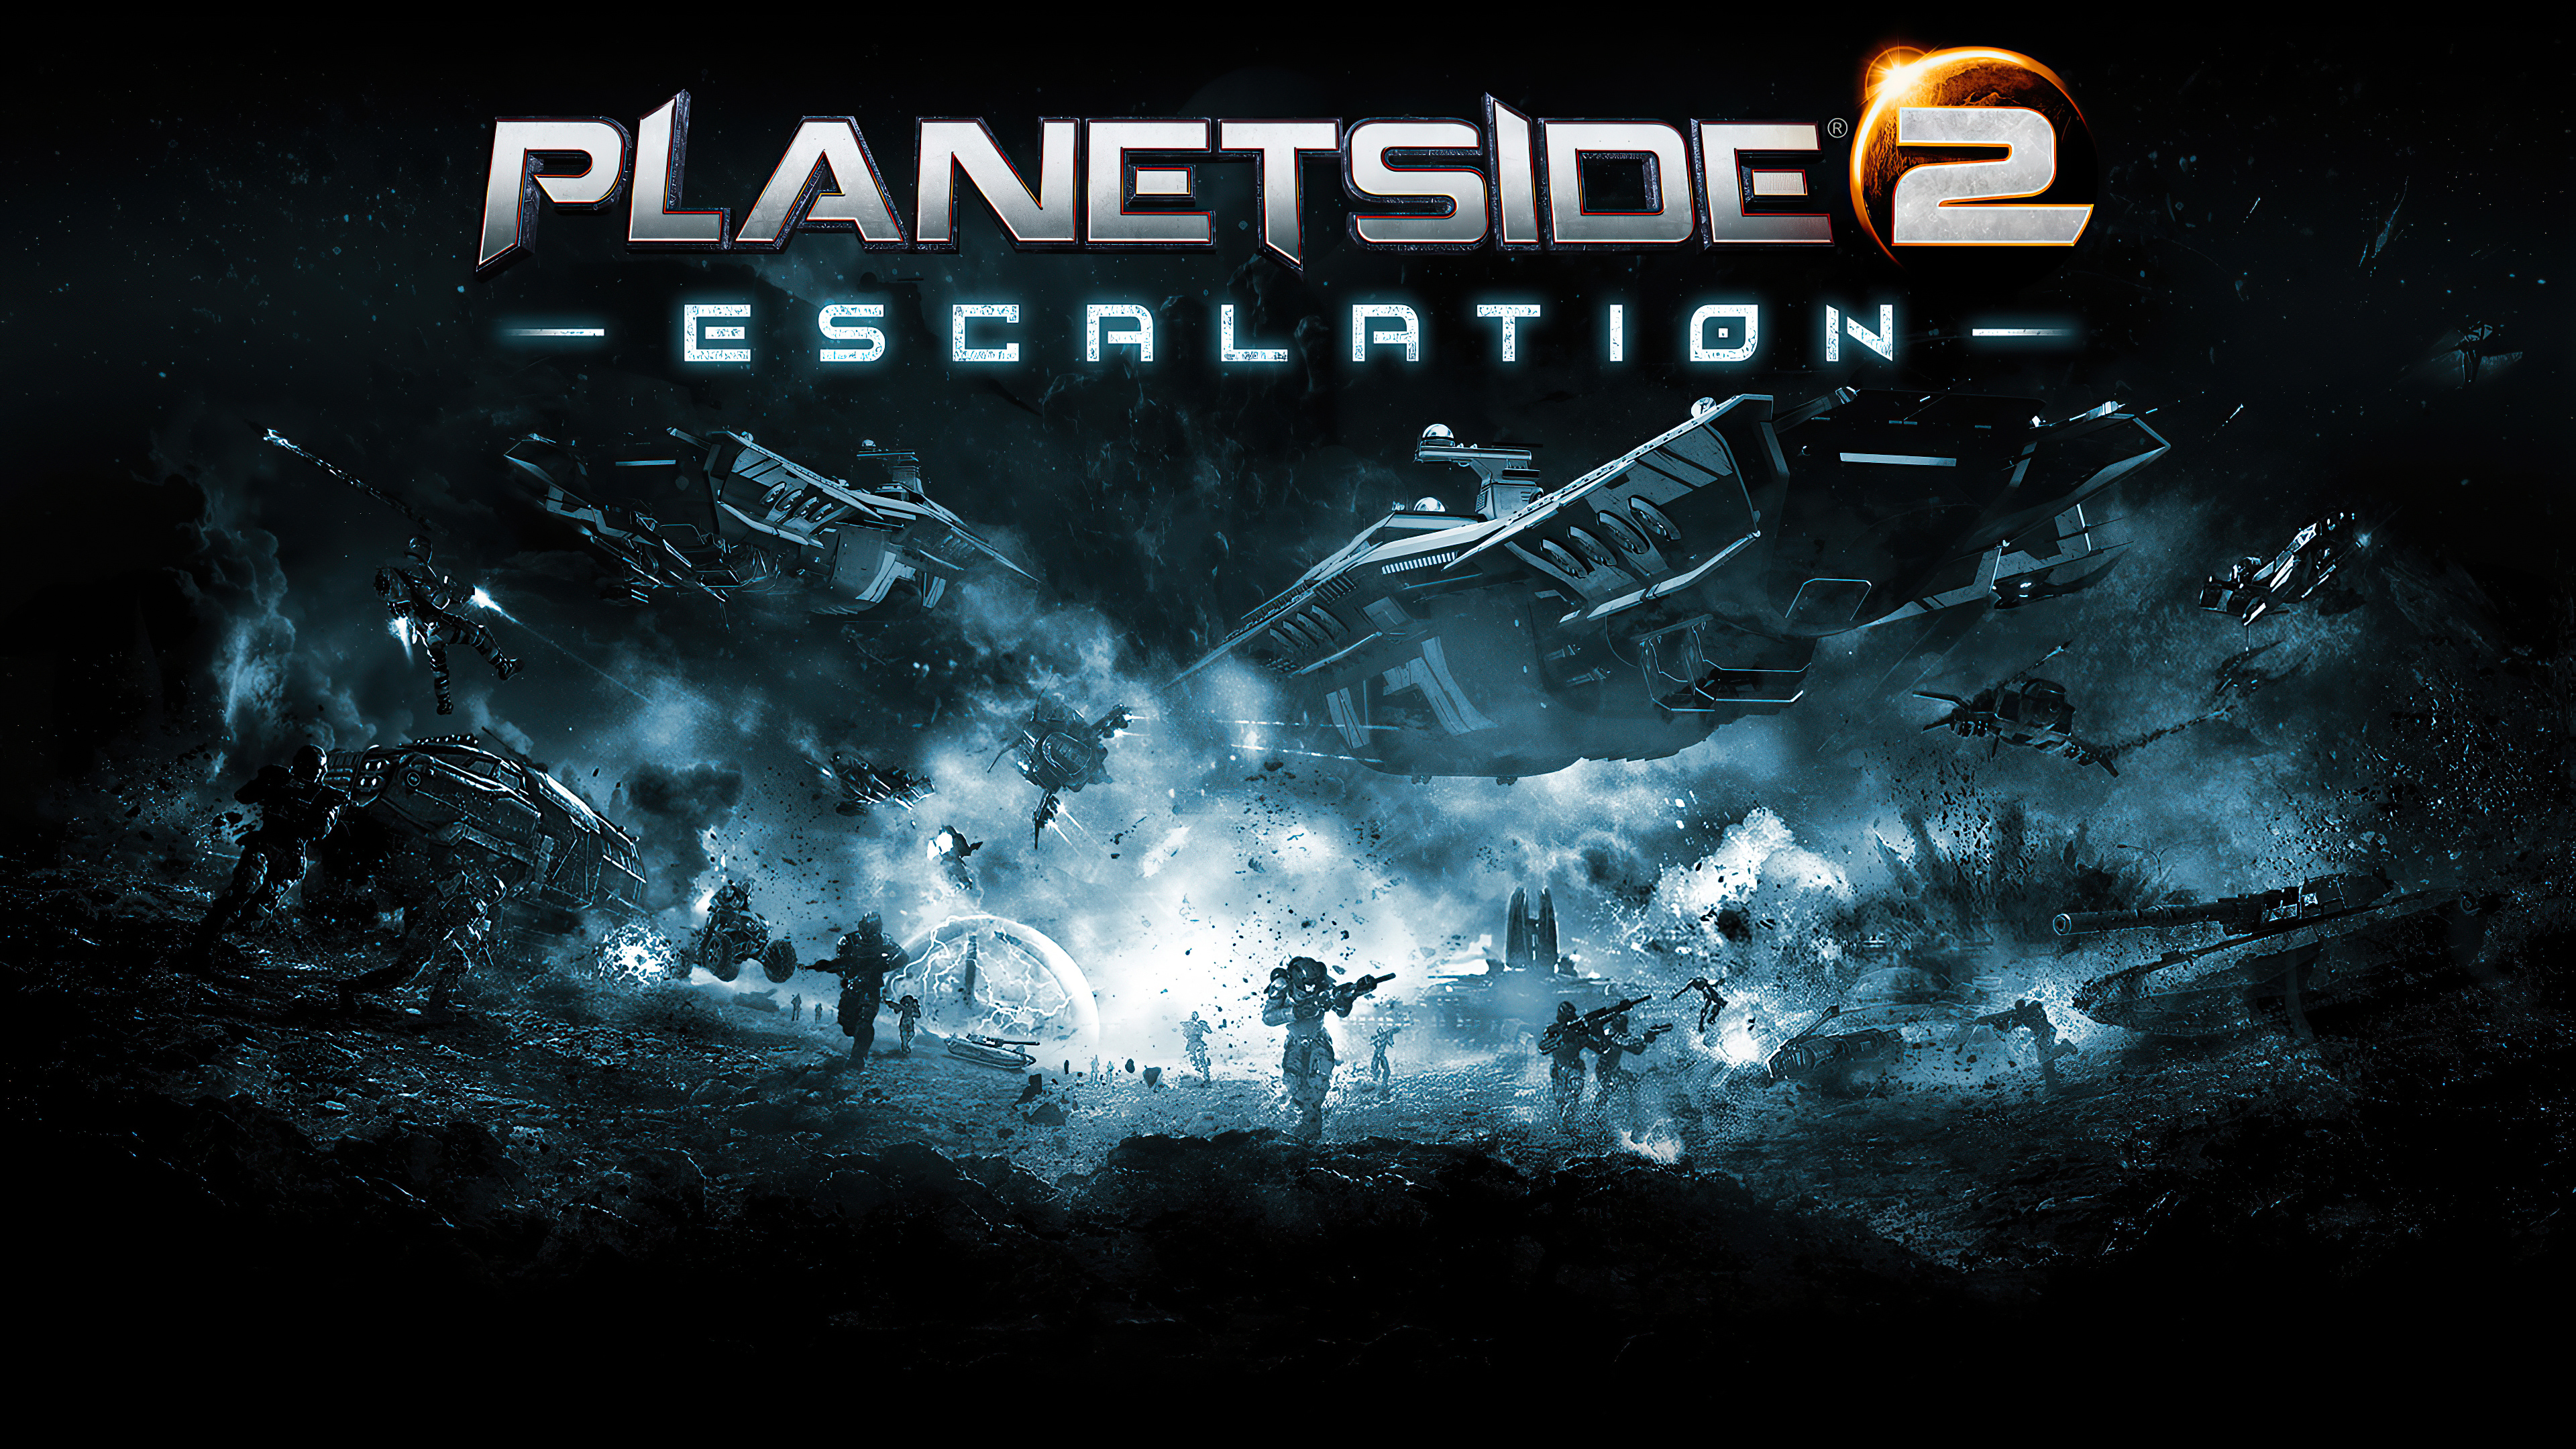 Planetside escalation hd games k wallpapers images backgrounds photos and pictures